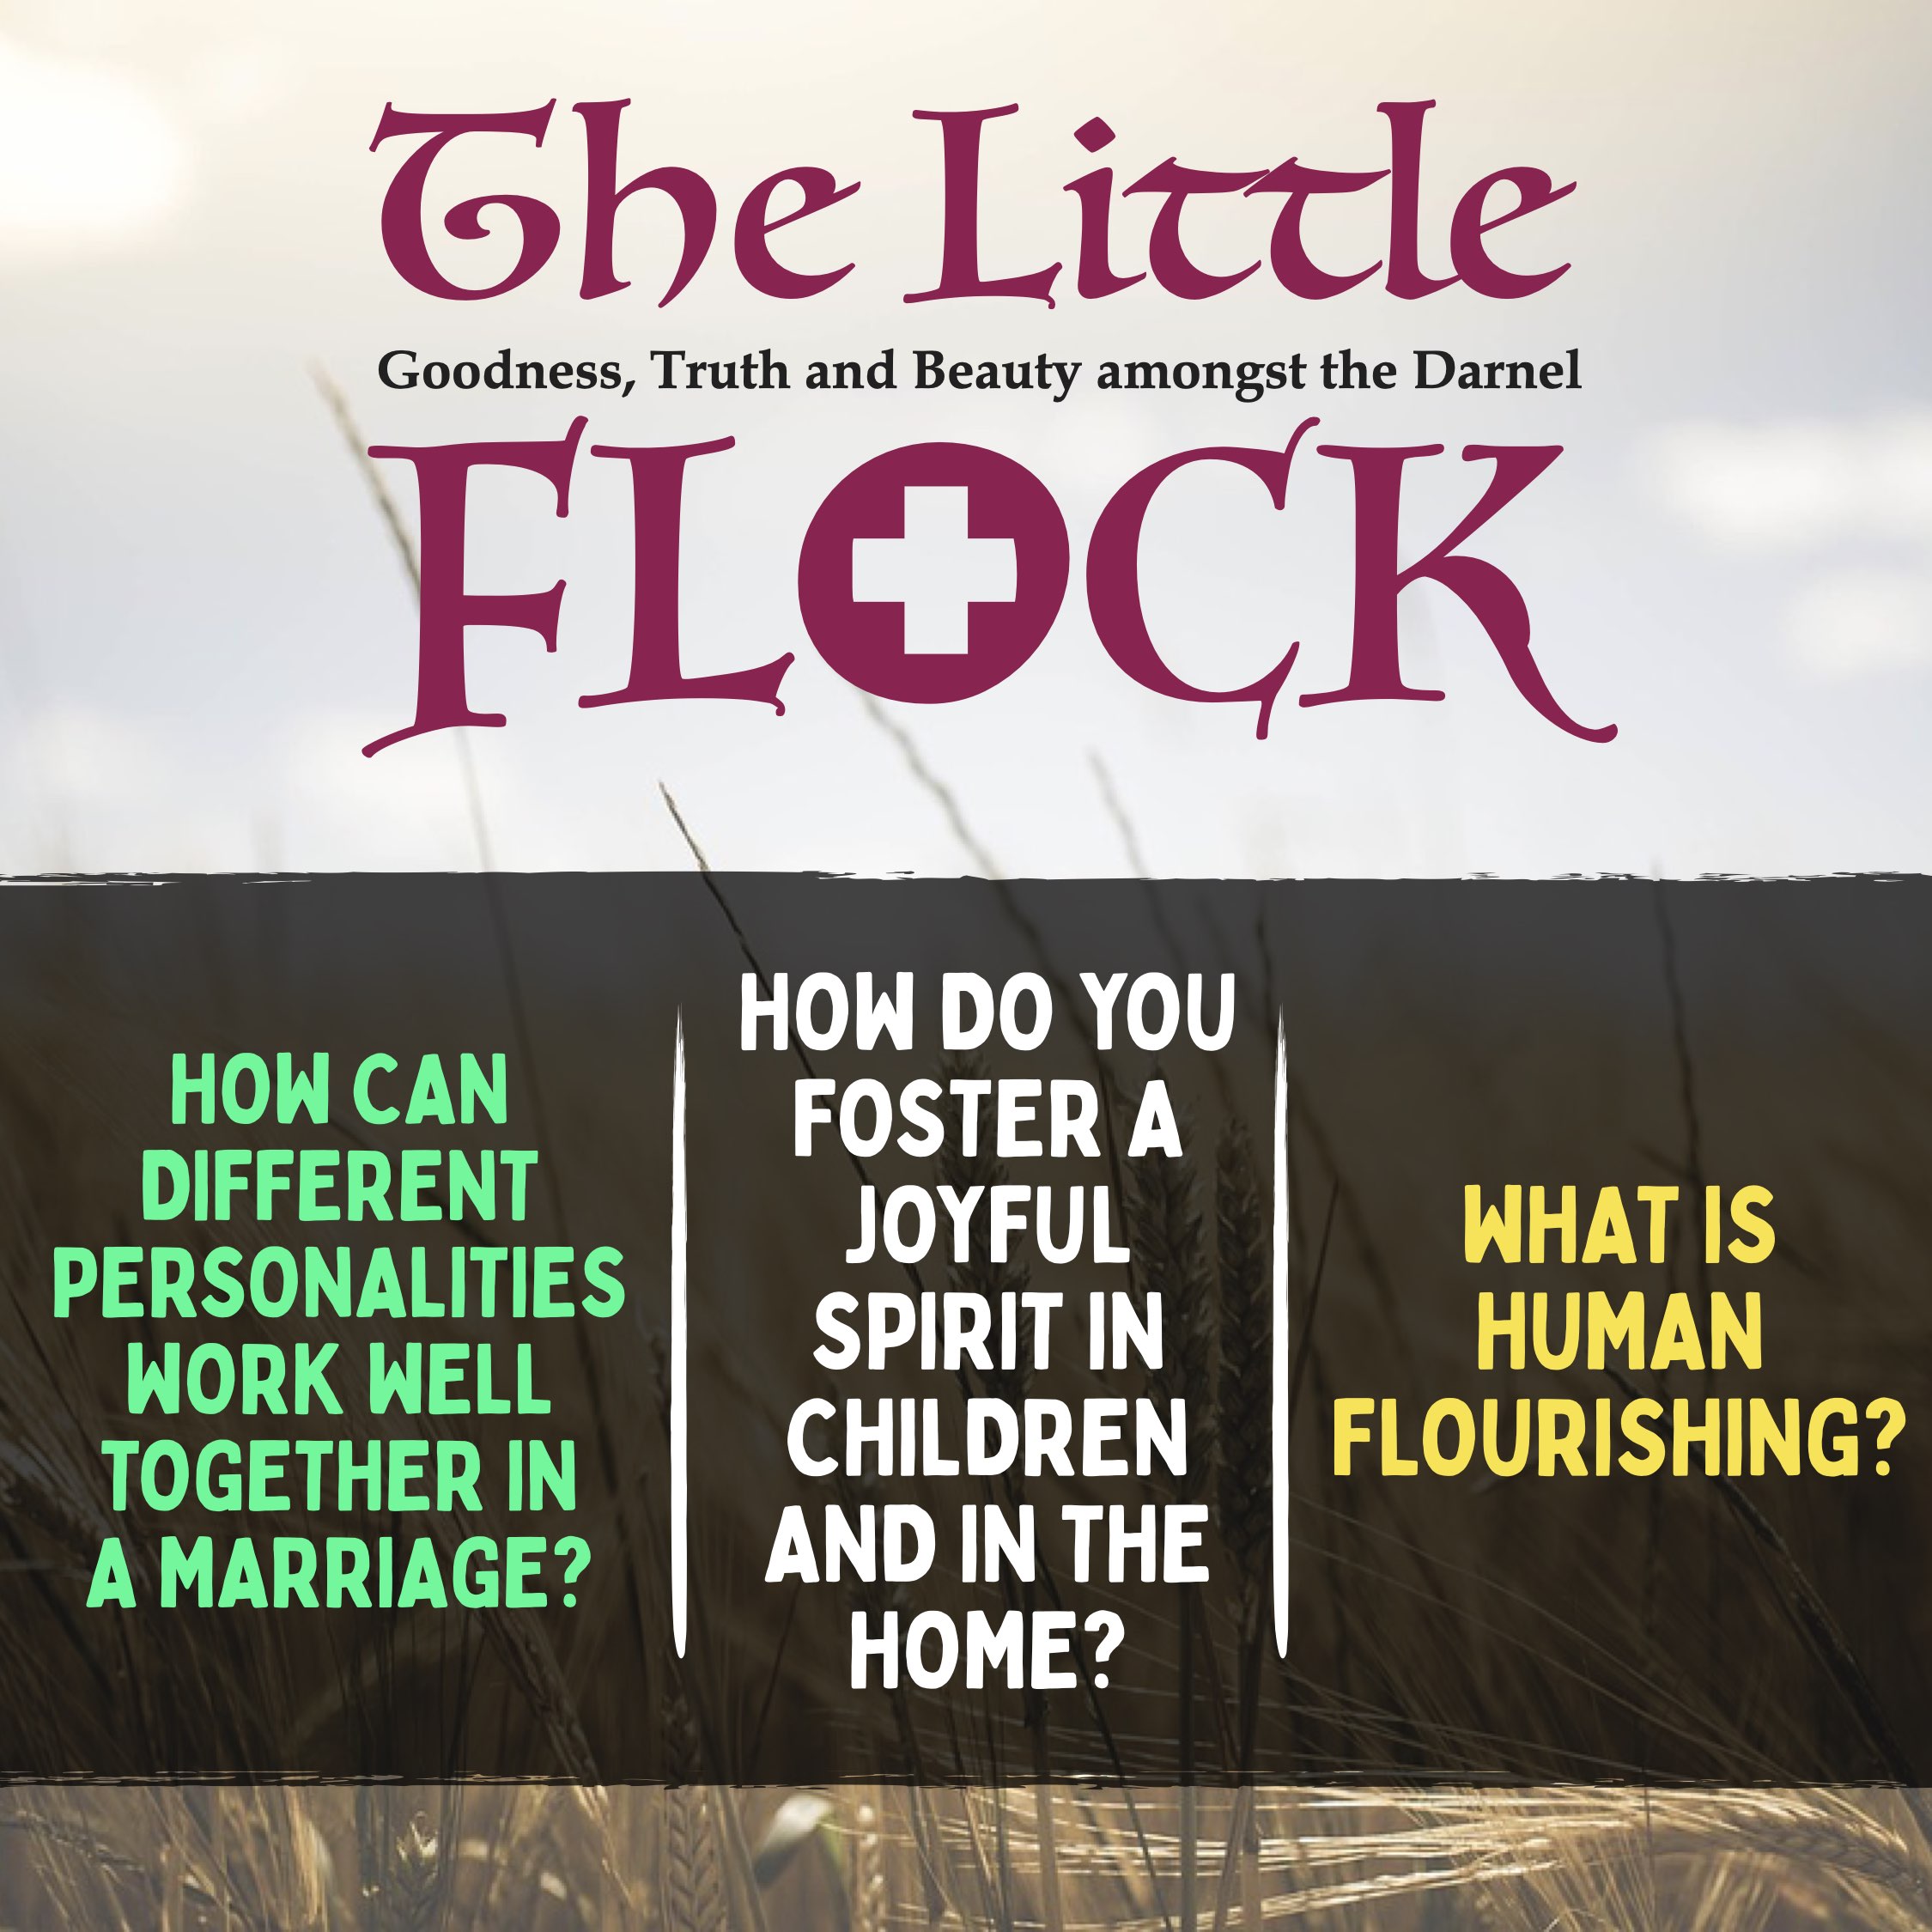 11. How do you foster a joyful spirit in children and in the home? What is human flourishing? How can different personalities work well together in a marriage?